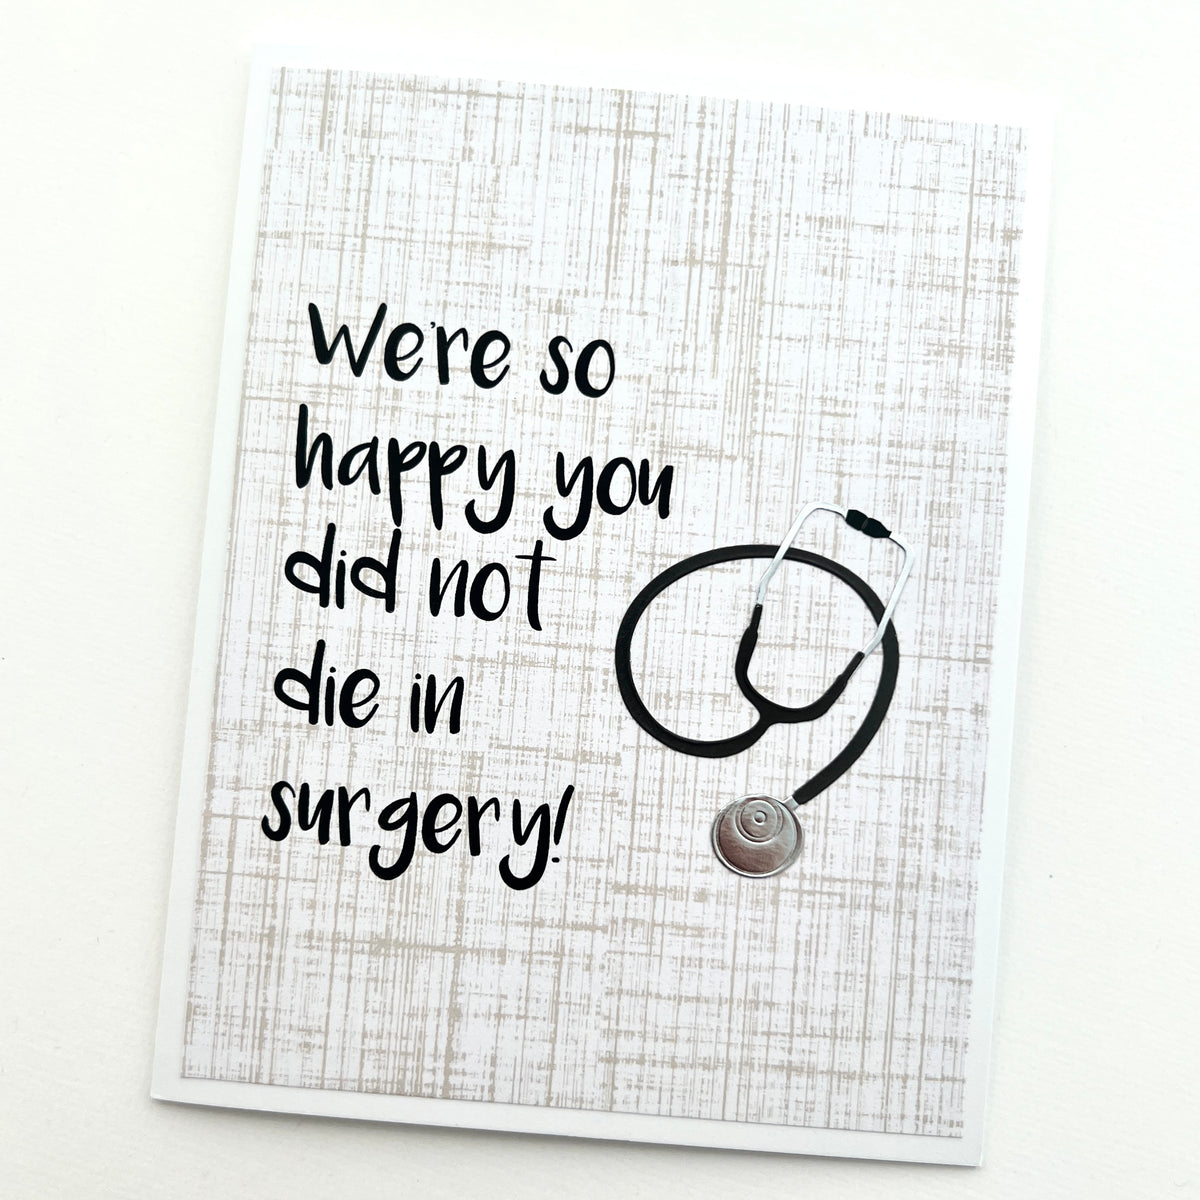 Get Well Happy You Didn't Die in Surgery card